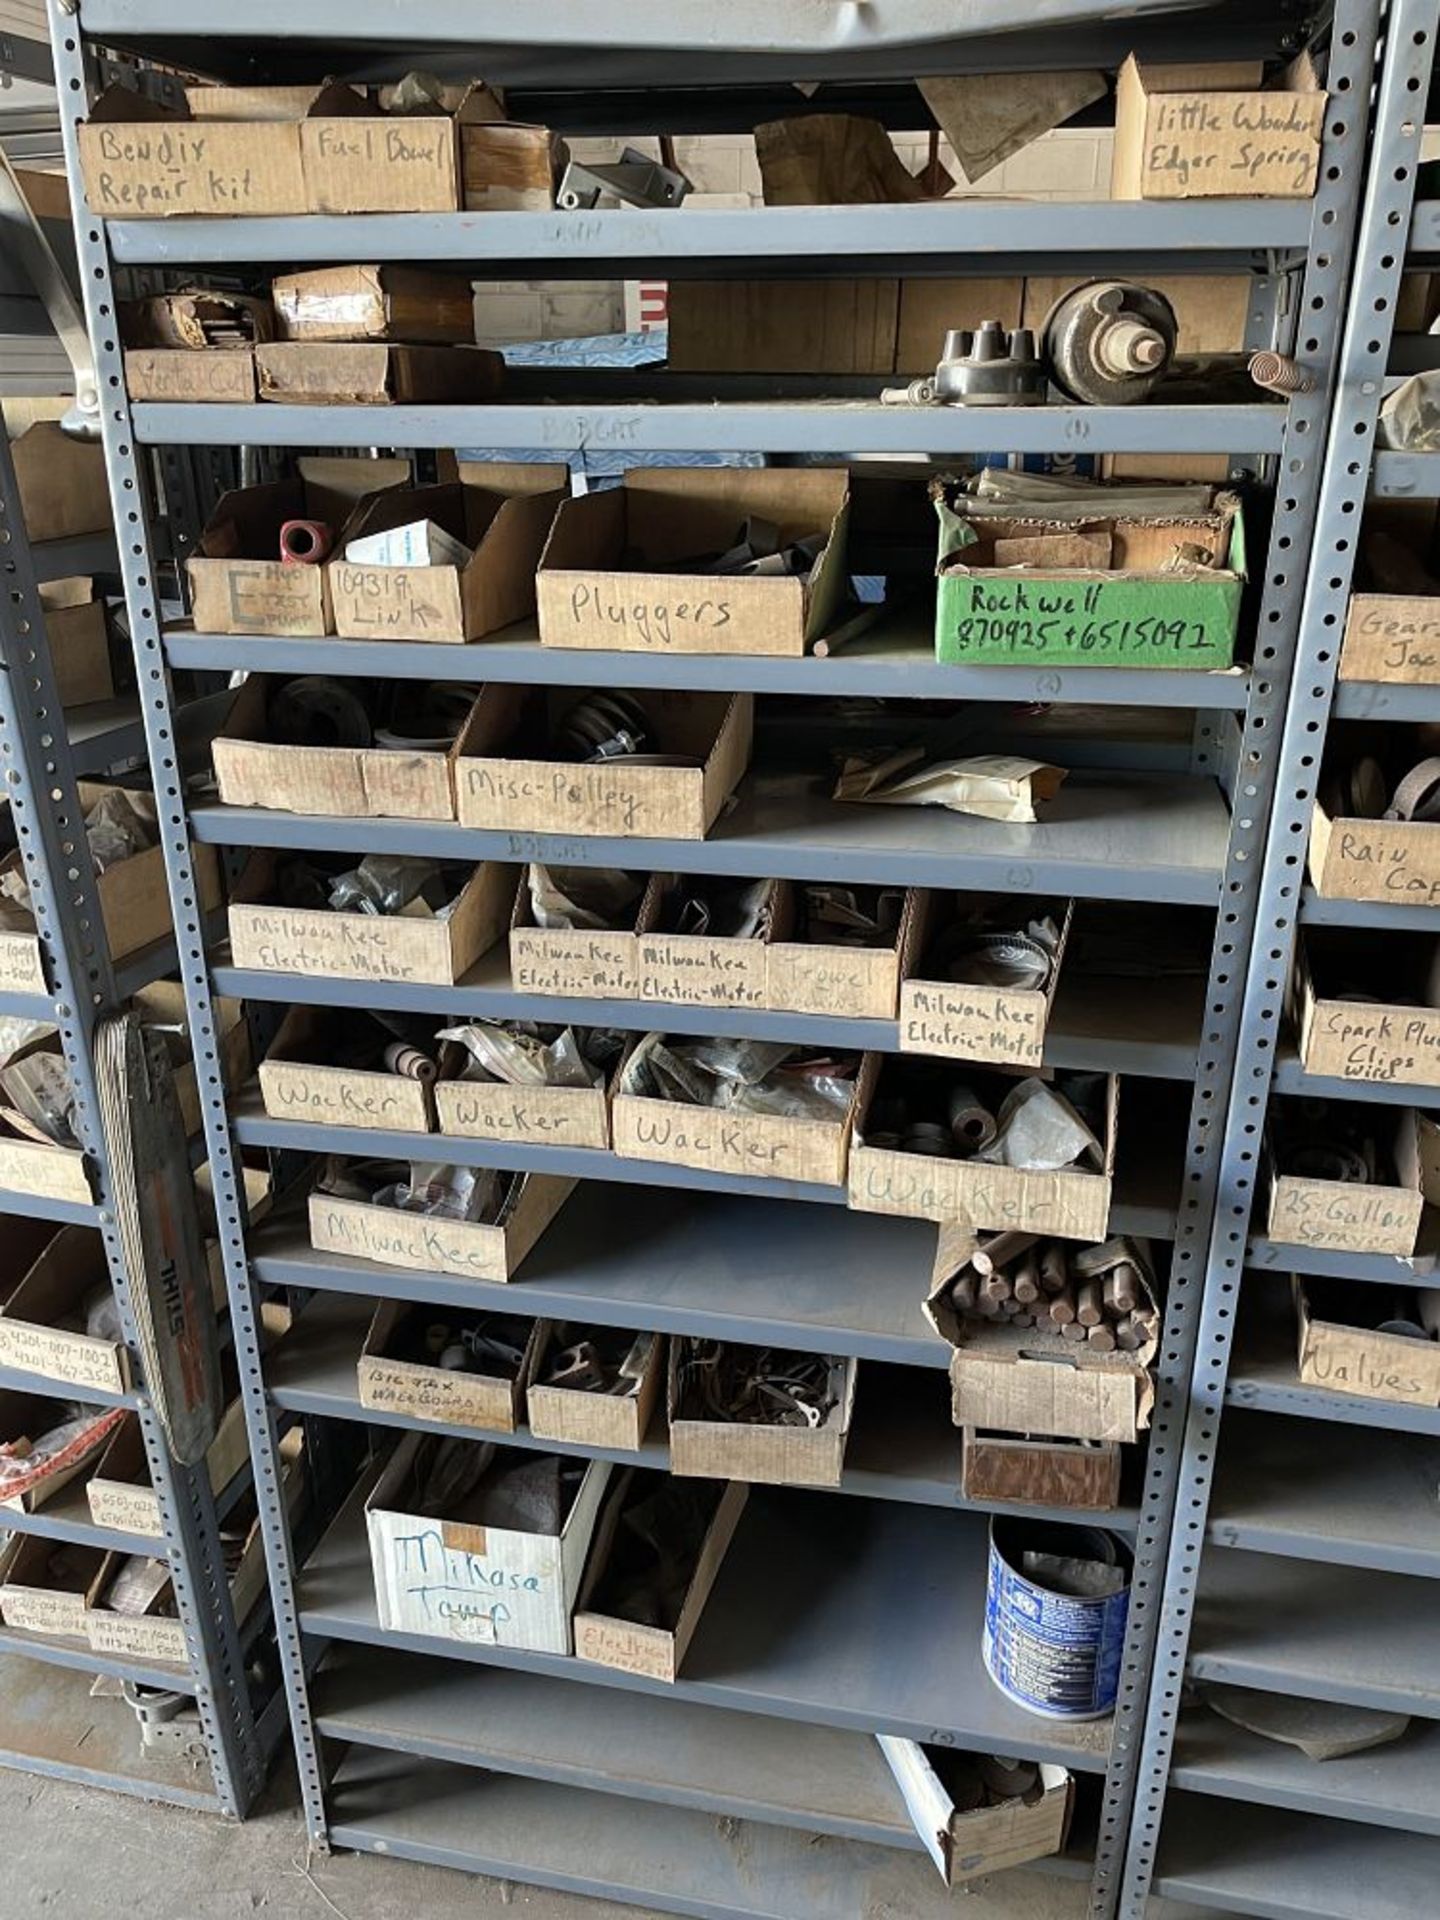 Parts Department: Contents & Shelves, 16 sections - Image 8 of 16